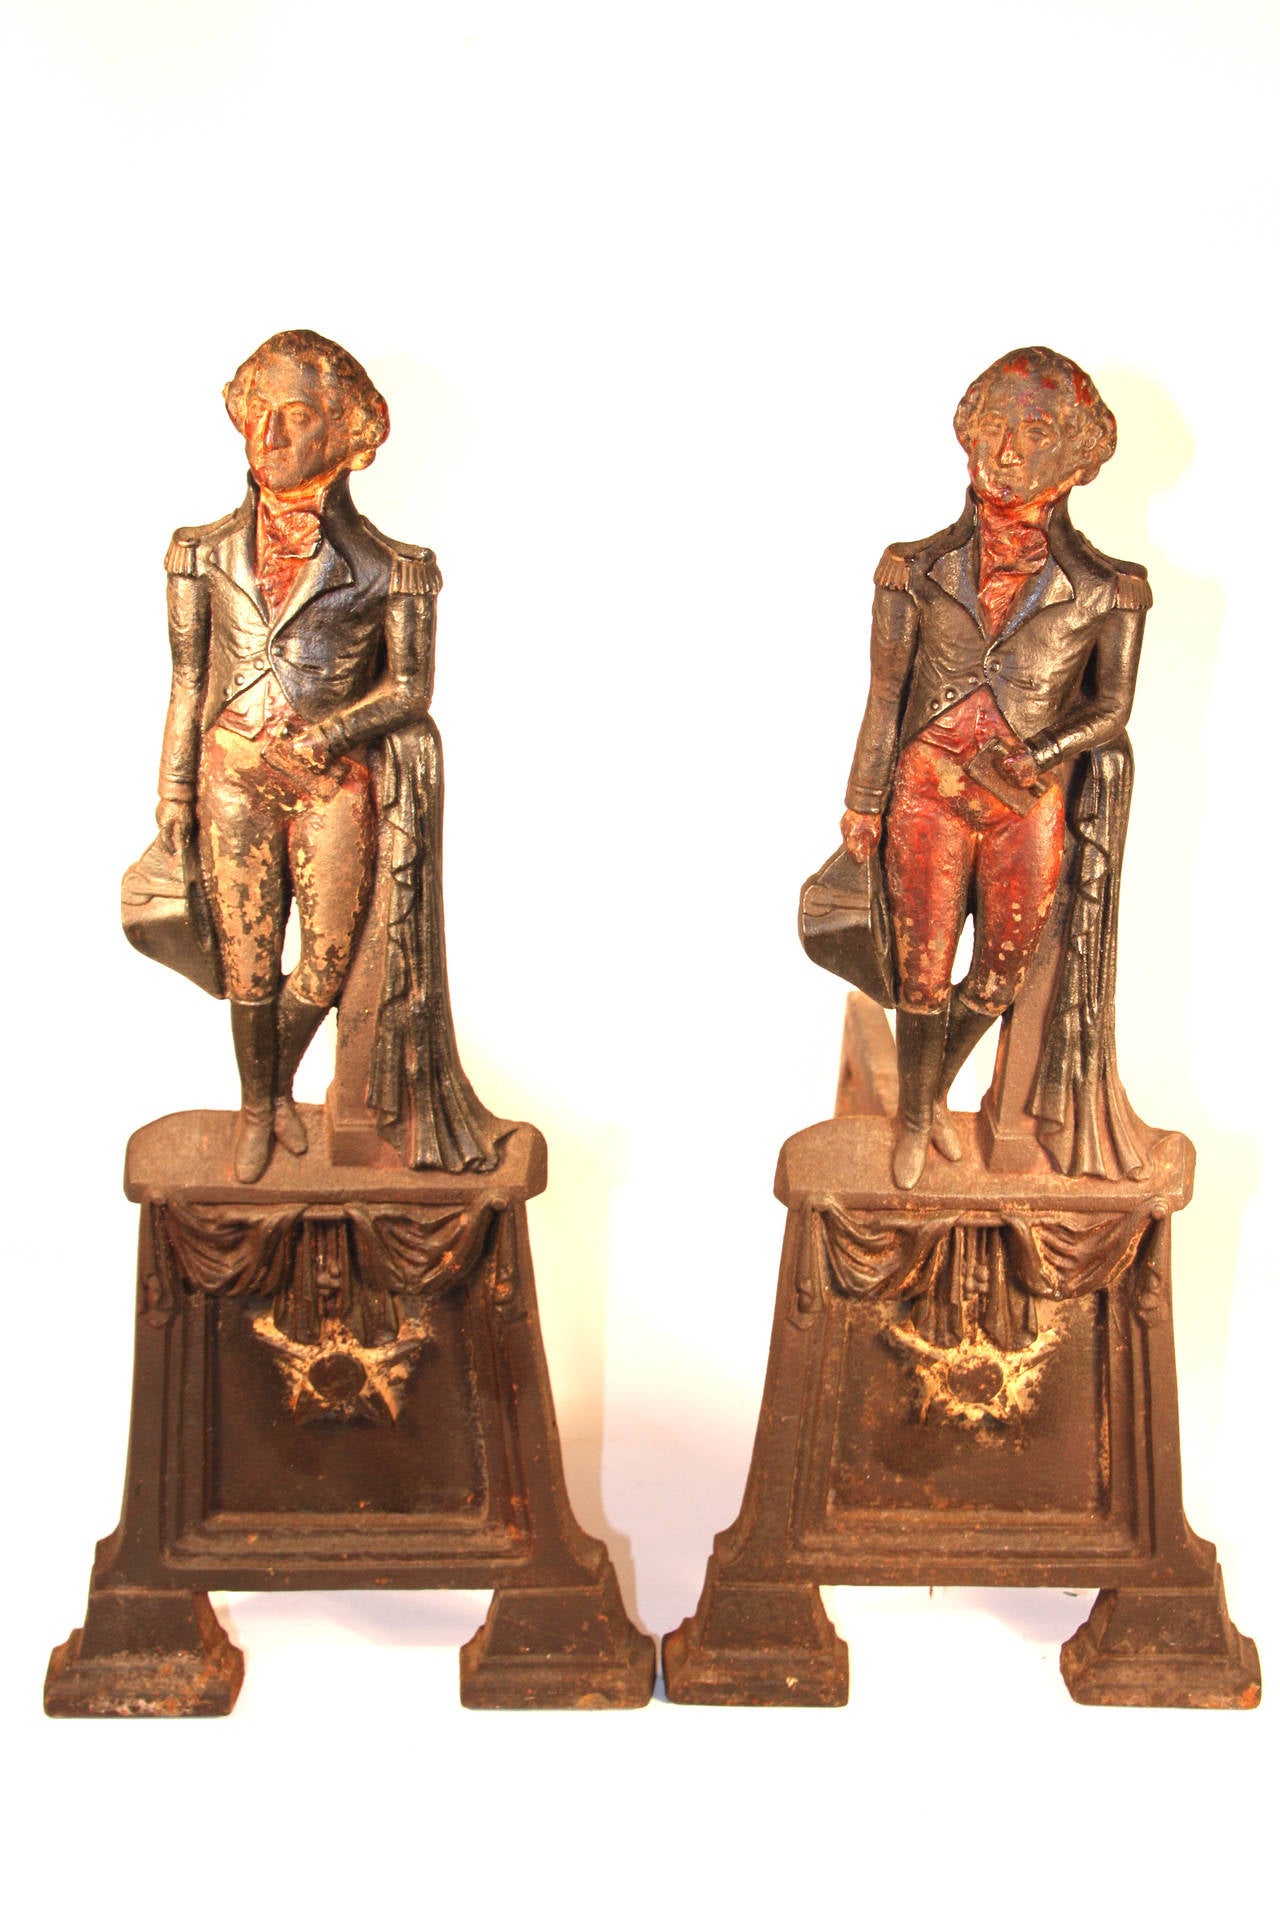 Pair of cast iron andirons in the form of George Washington on a draped plinth retaining an old polychrome decorated surface.  Late 19th century.  21